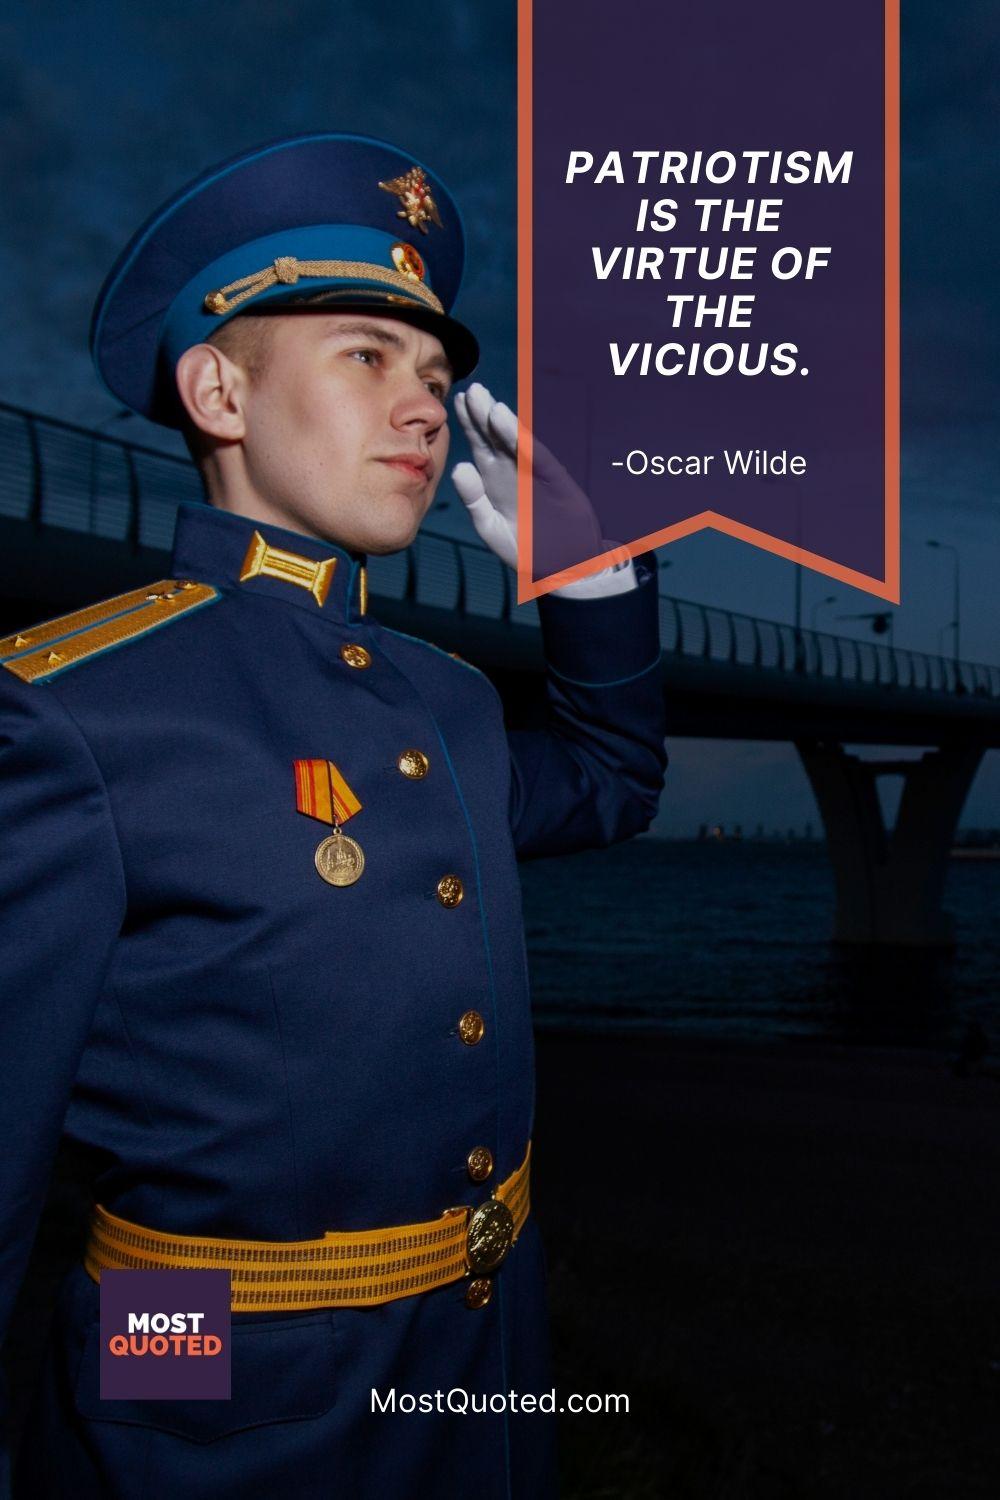 Patriotism is the virtue of the vicious. - Oscar Wilde